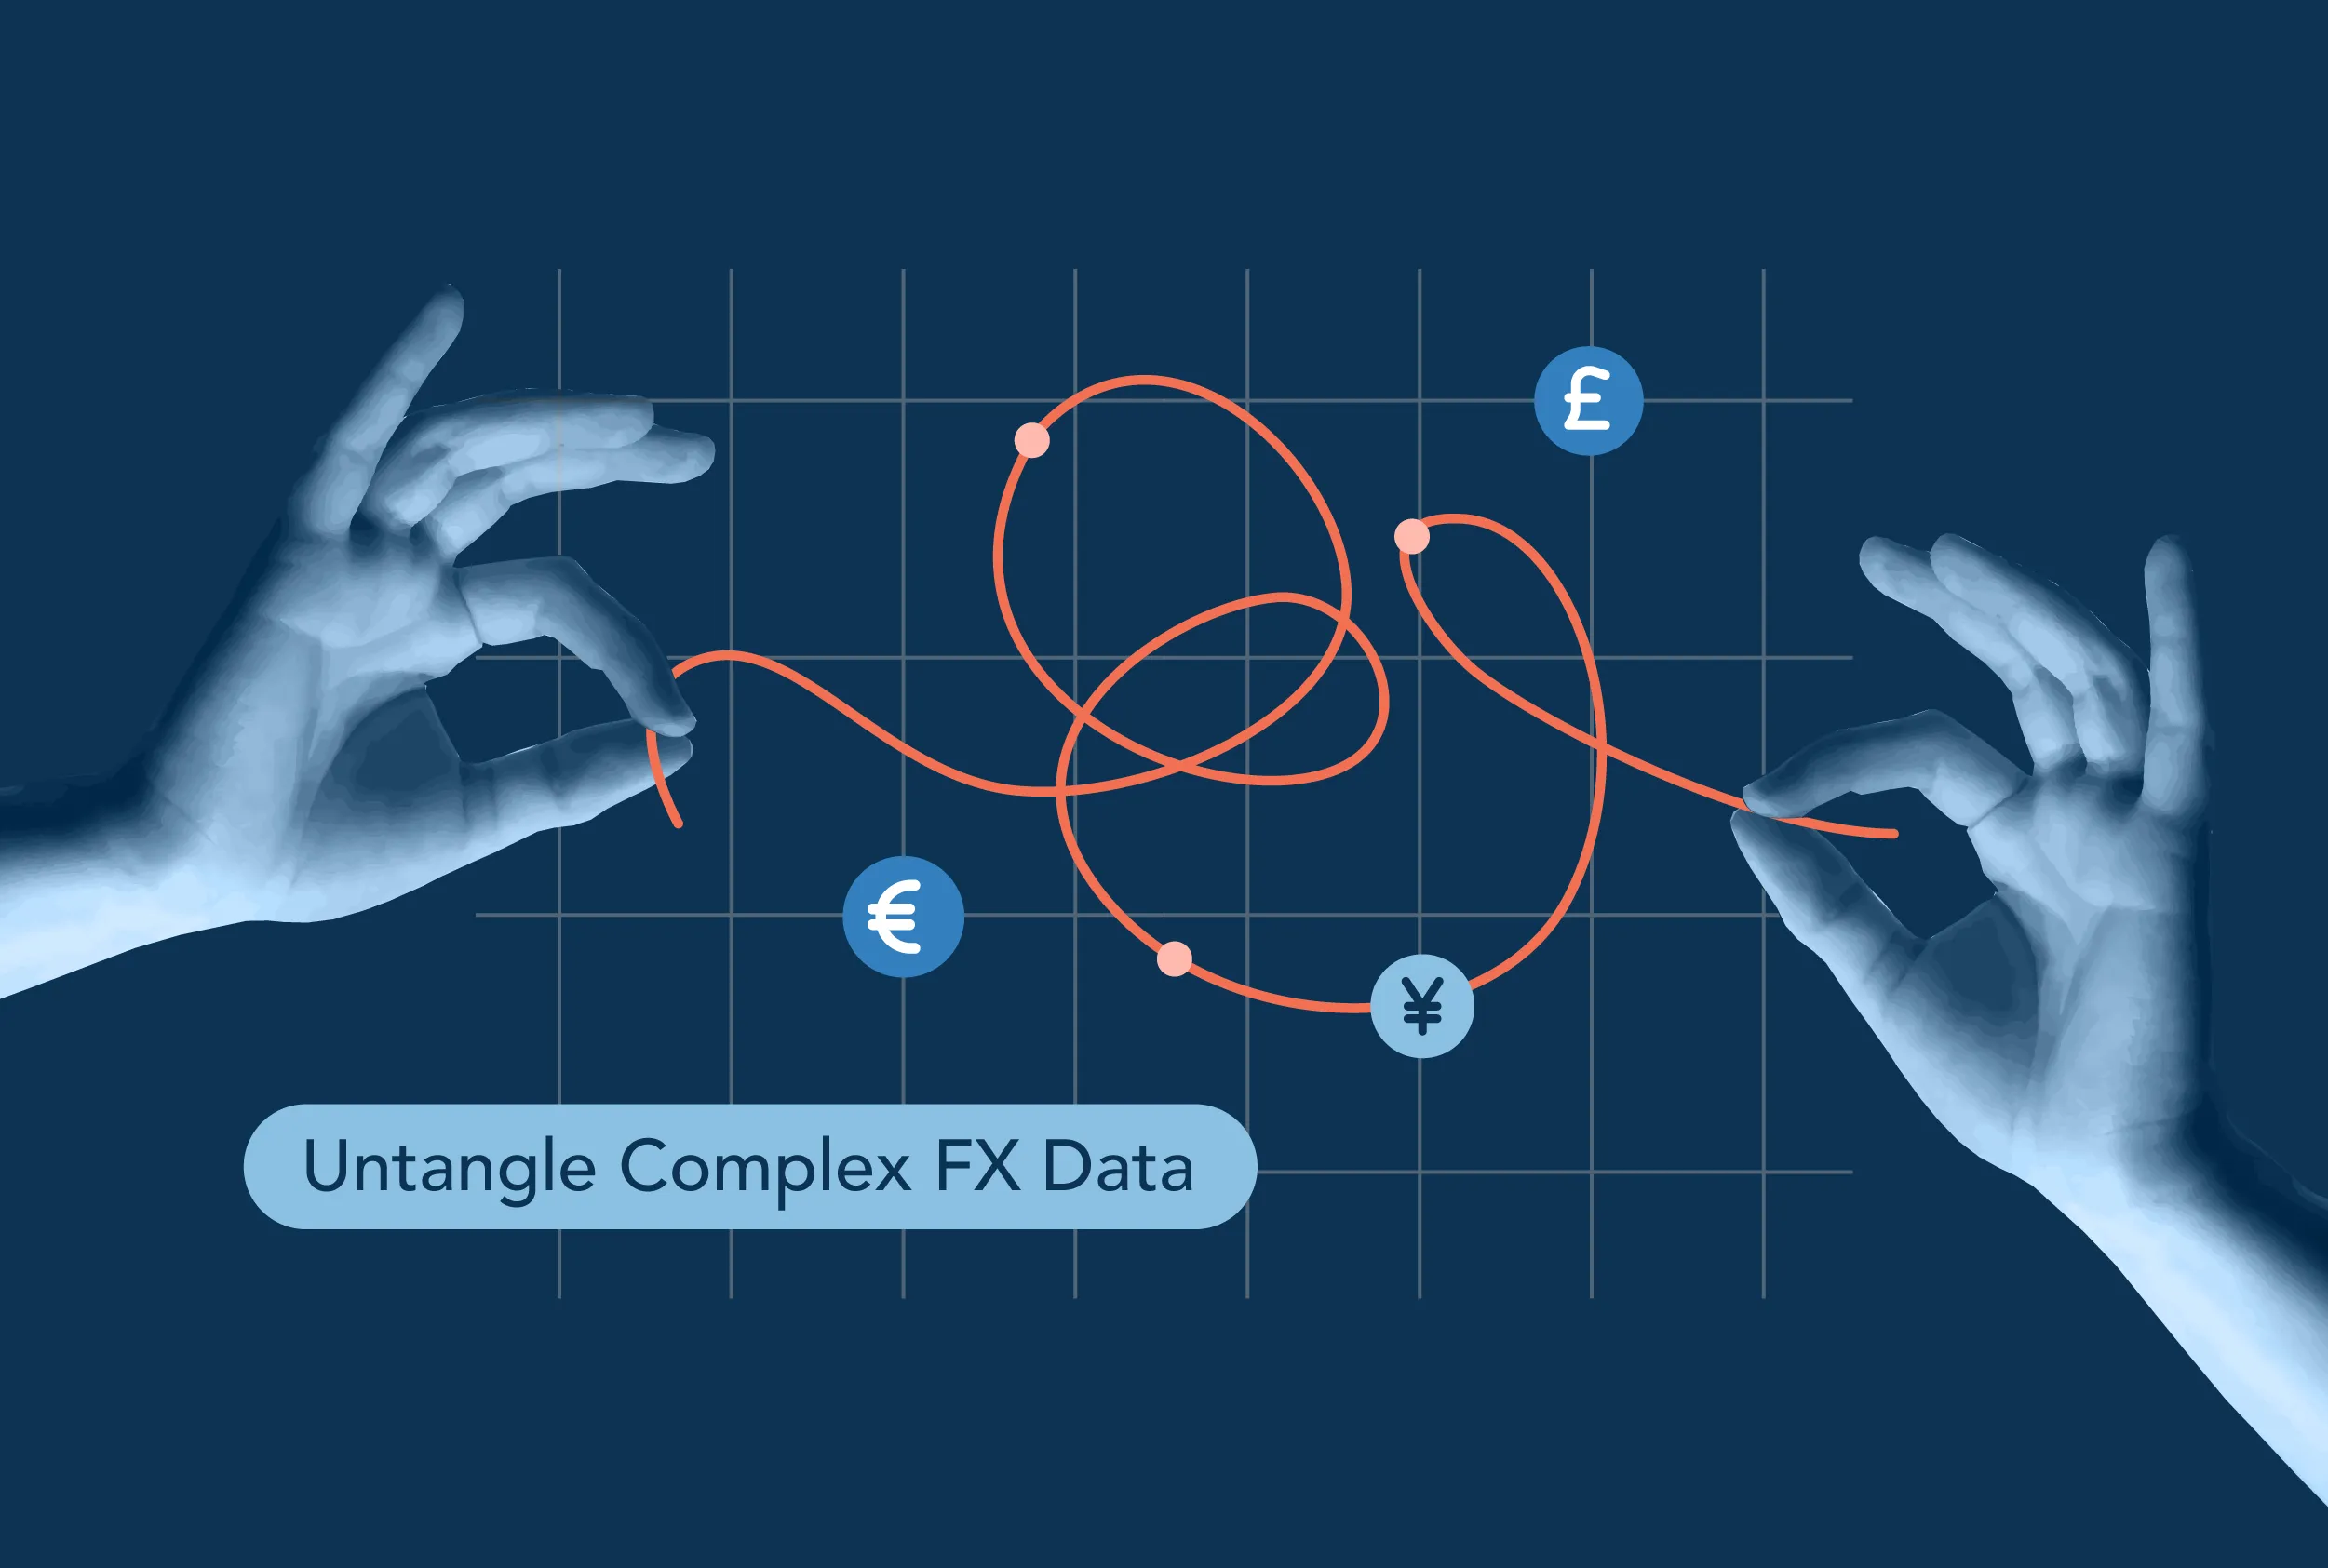 Untangling and understanding the data relevant to FX